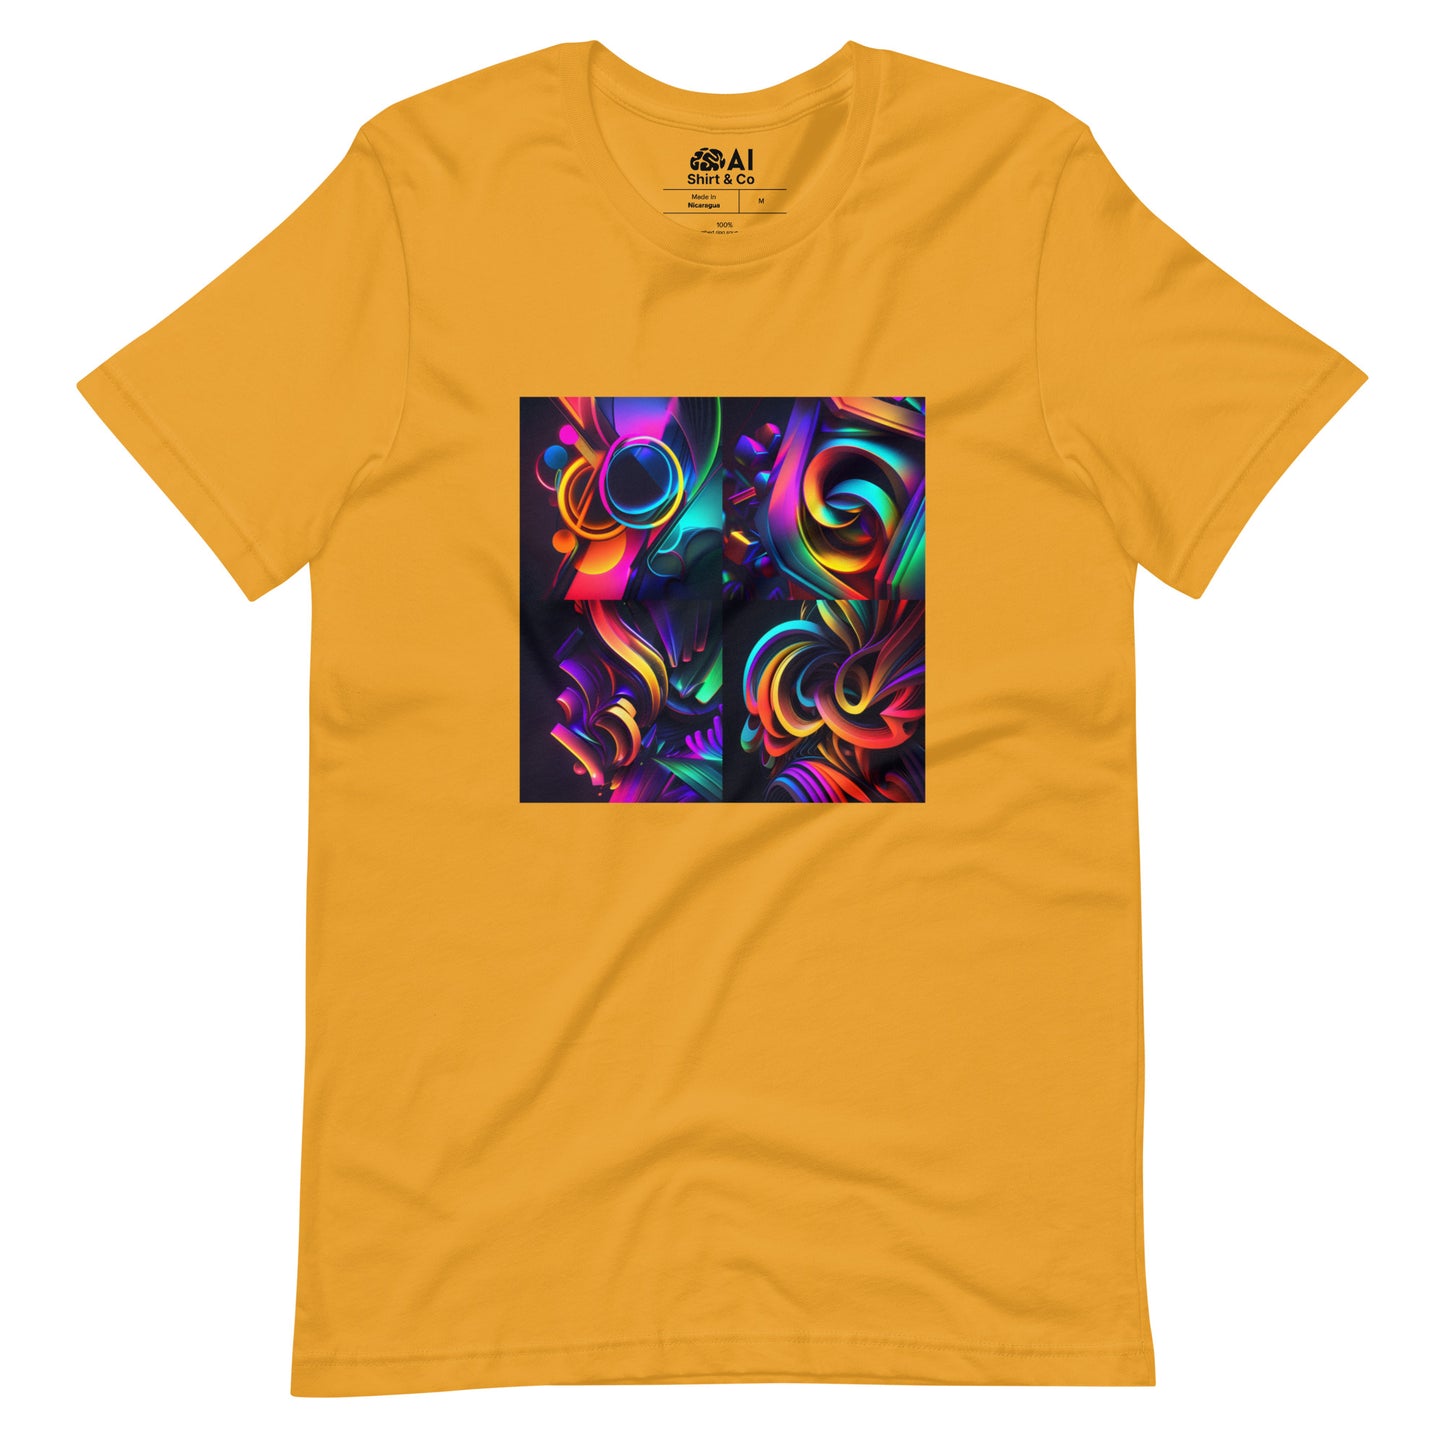 Colorful t-shirt